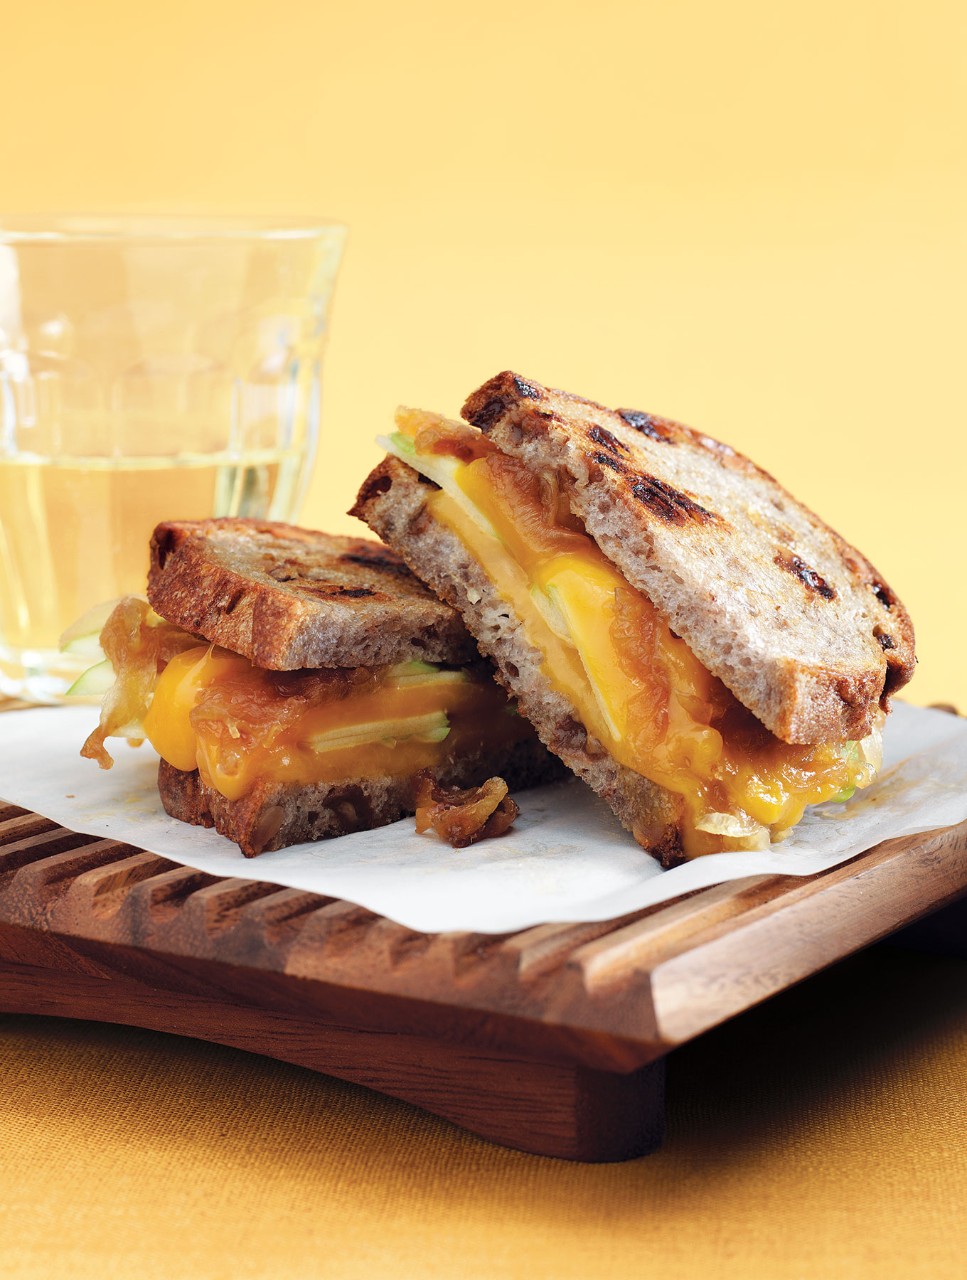 Smoked Cheddar, Caramelized Onion & Apple Grilled Cheese